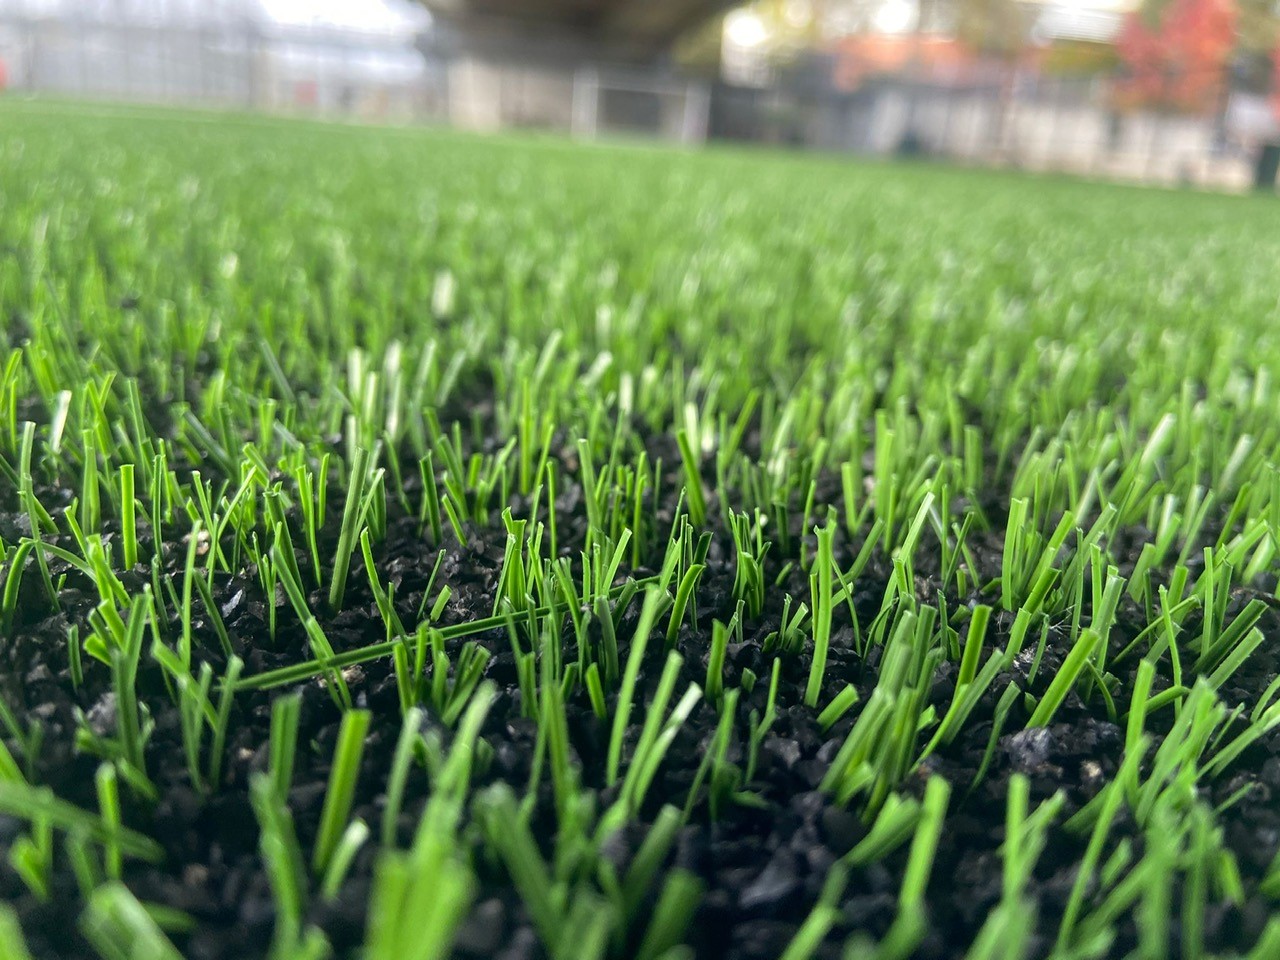 ETC Sports Surfaces chose Tiger Turf’s Atomic Pro 60 artificial football pitch surface as the ideal solution for Academy Sport, Westminster.